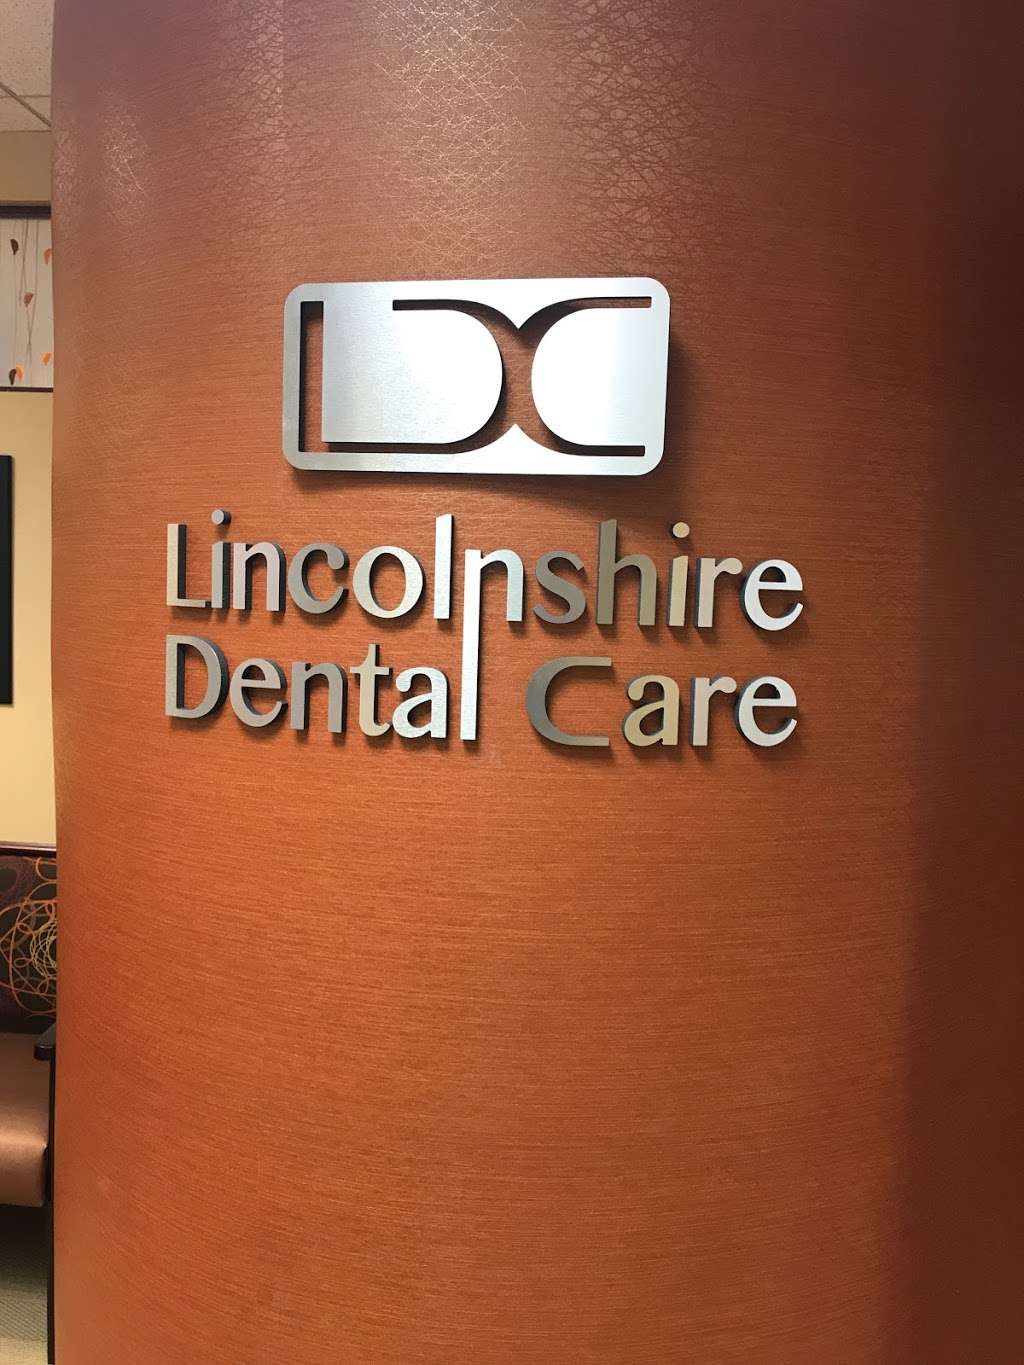 Lincolnshire Dental Care | 185 N Milwaukee Ave #214, Lincolnshire, IL 60069 | Phone: (847) 478-9640